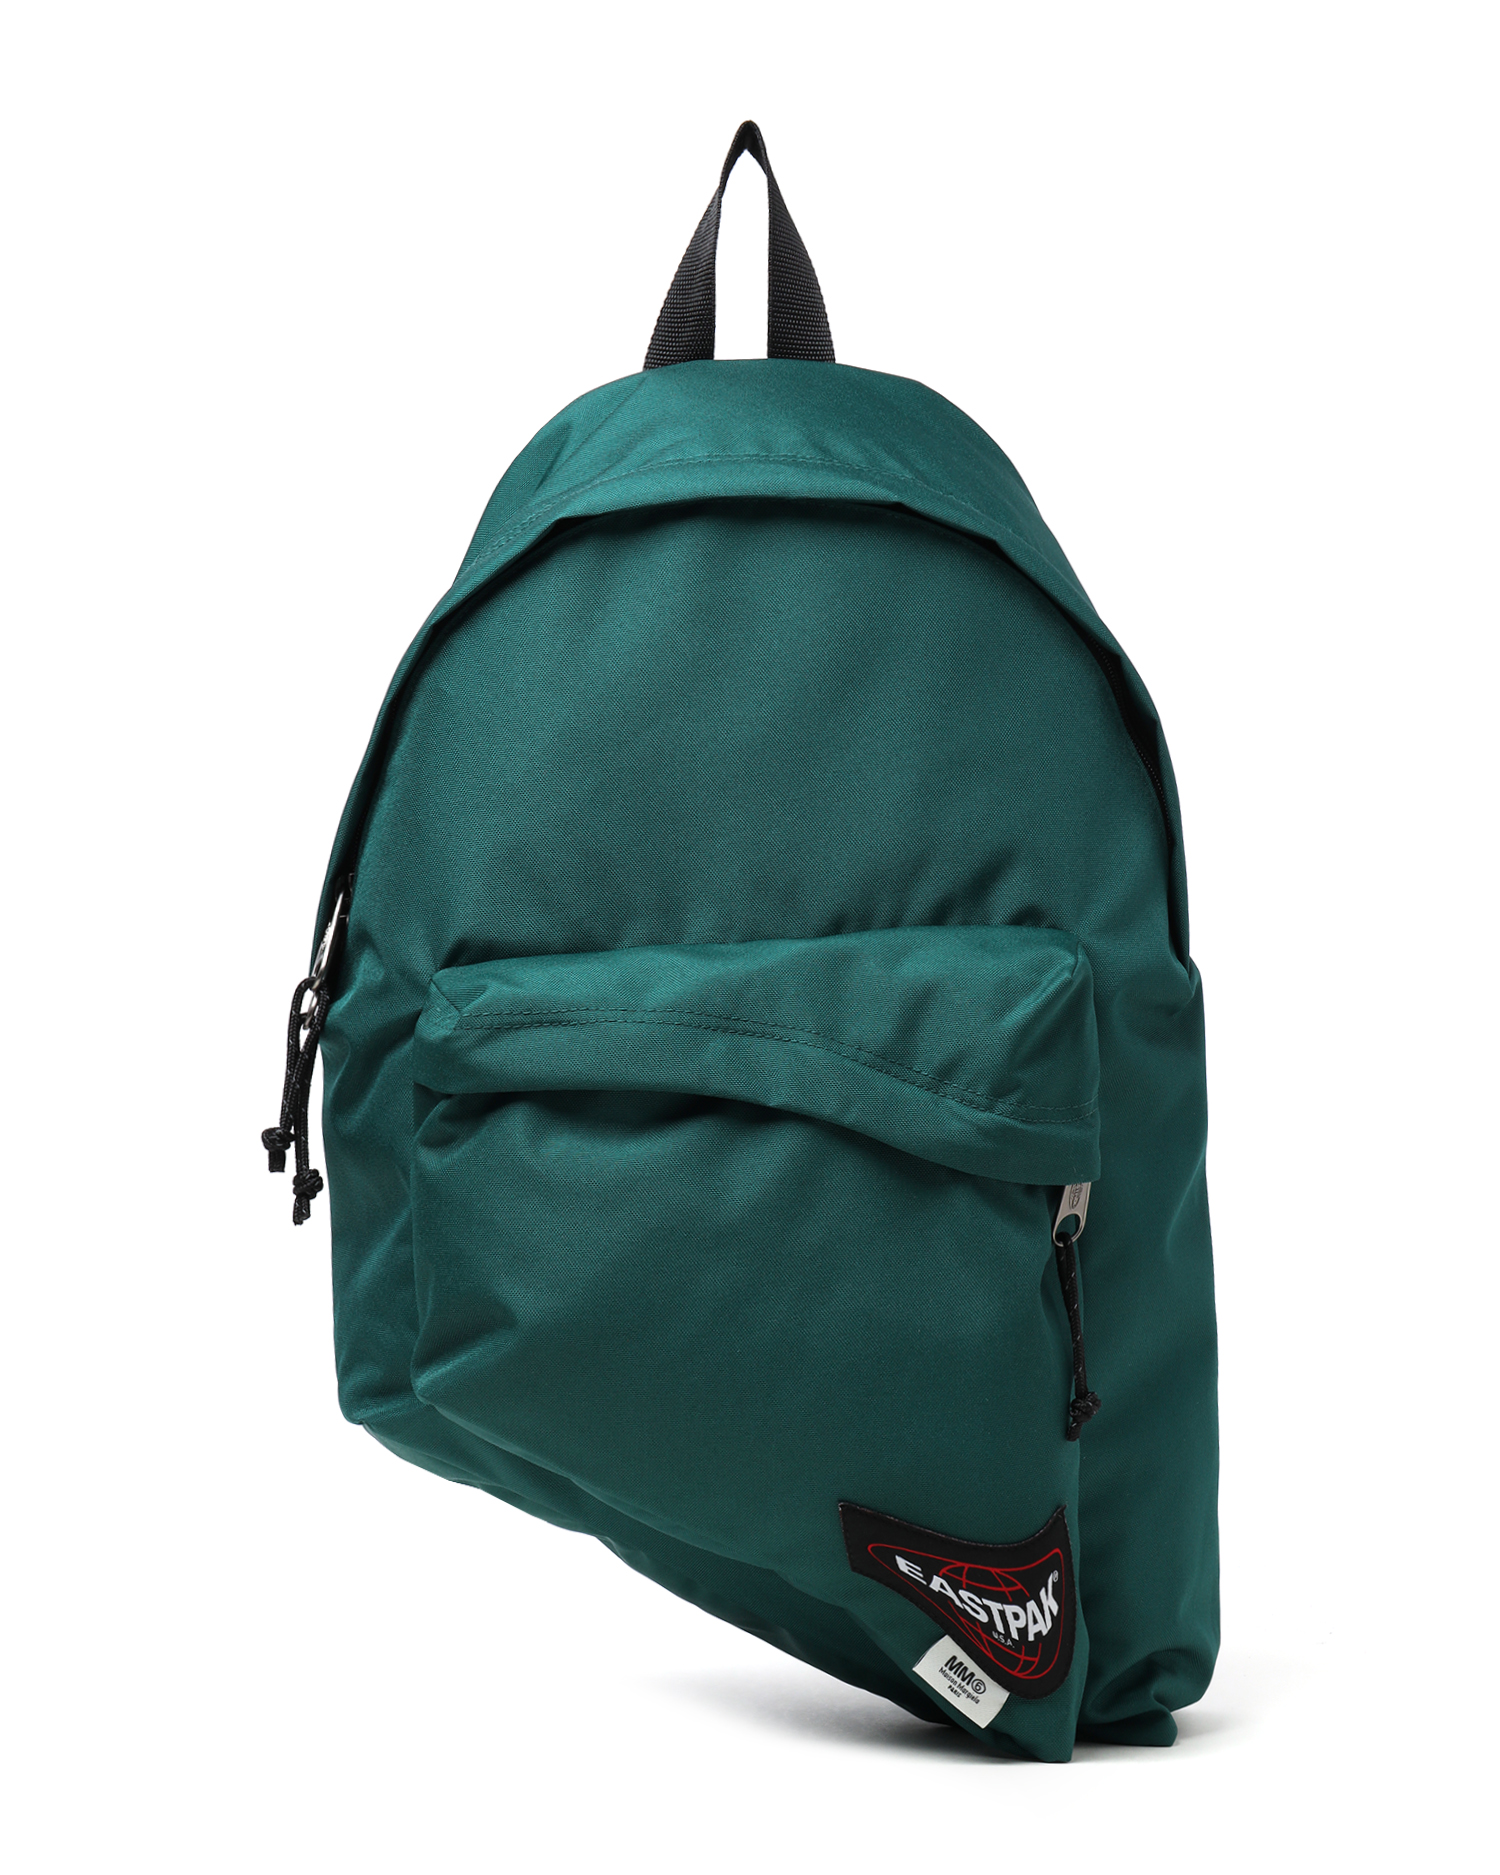 x eastpak dripping backpack